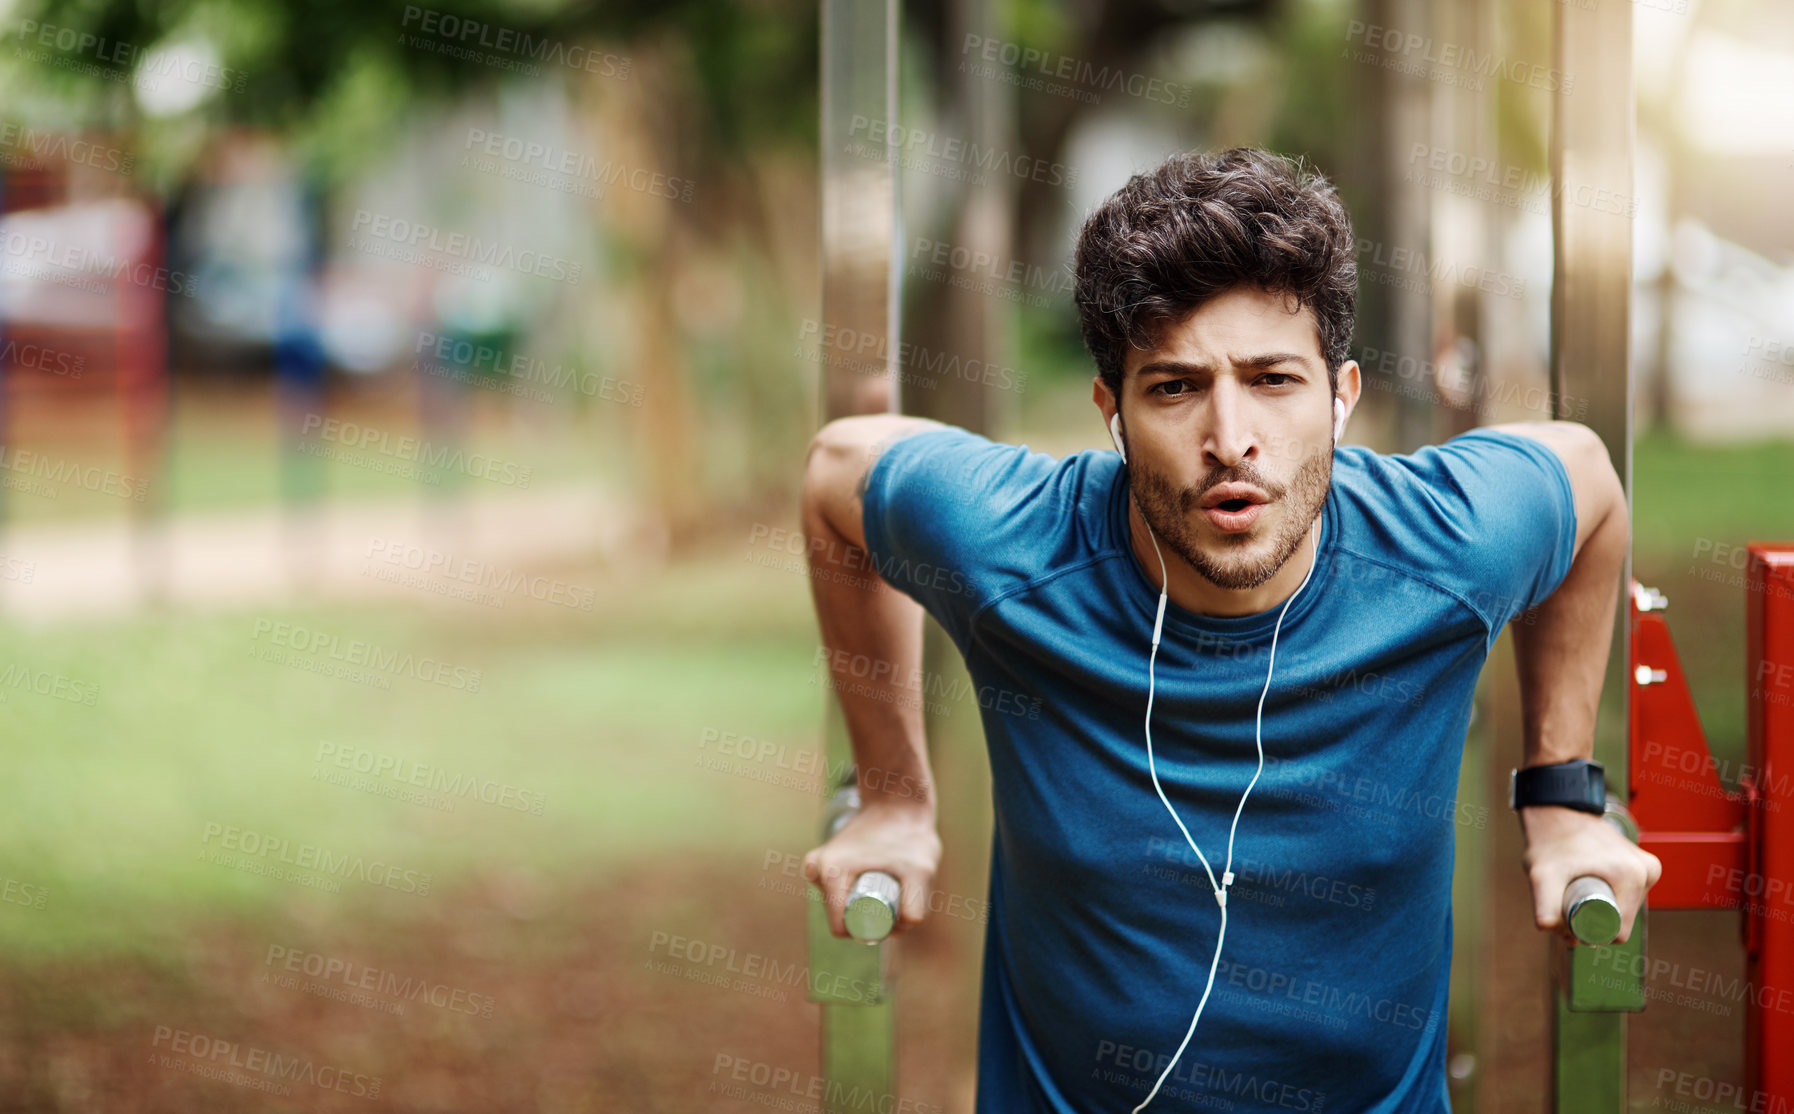 Buy stock photo Portrait of a sporty young man doing stretching techniques while exercising outdoors